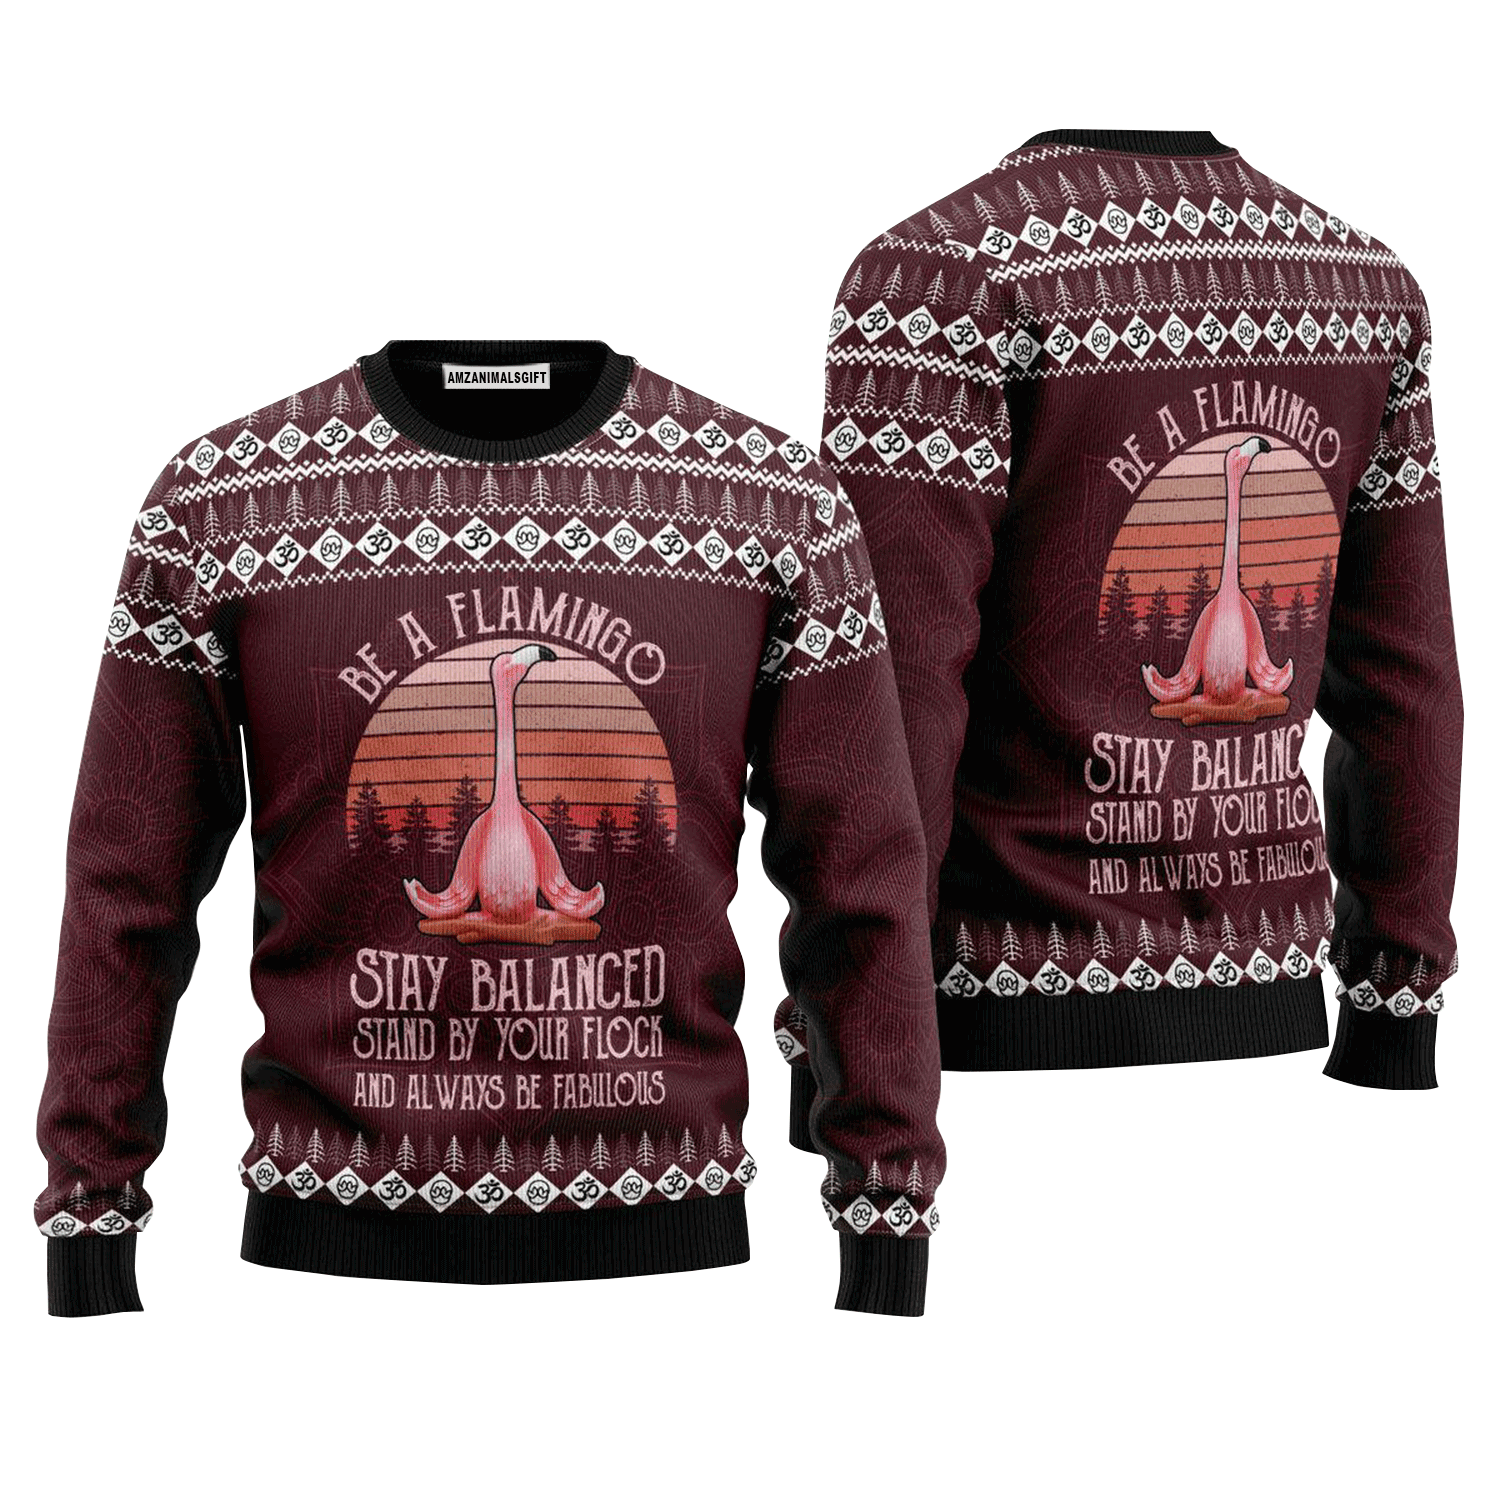 Flamingo Yoga Sweater Be A Flamingo Stay Balanced, Ugly Sweater For Men & Women, Perfect Outfit For Christmas New Year Autumn Winter